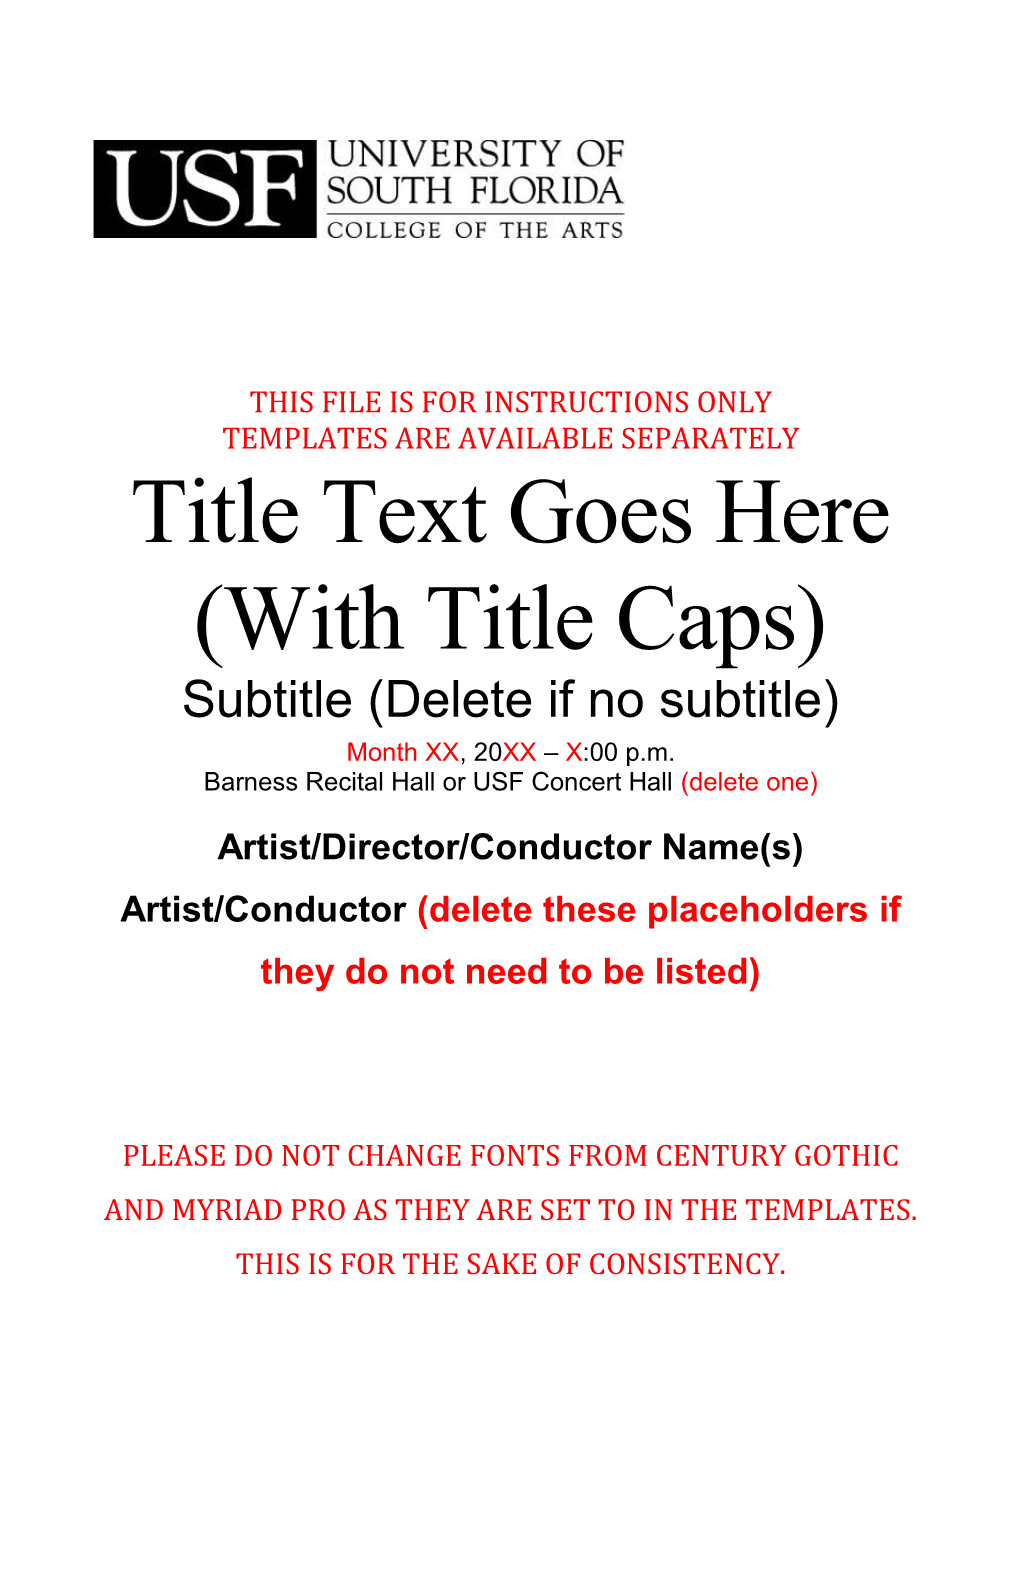 This File Is for Instructions Only